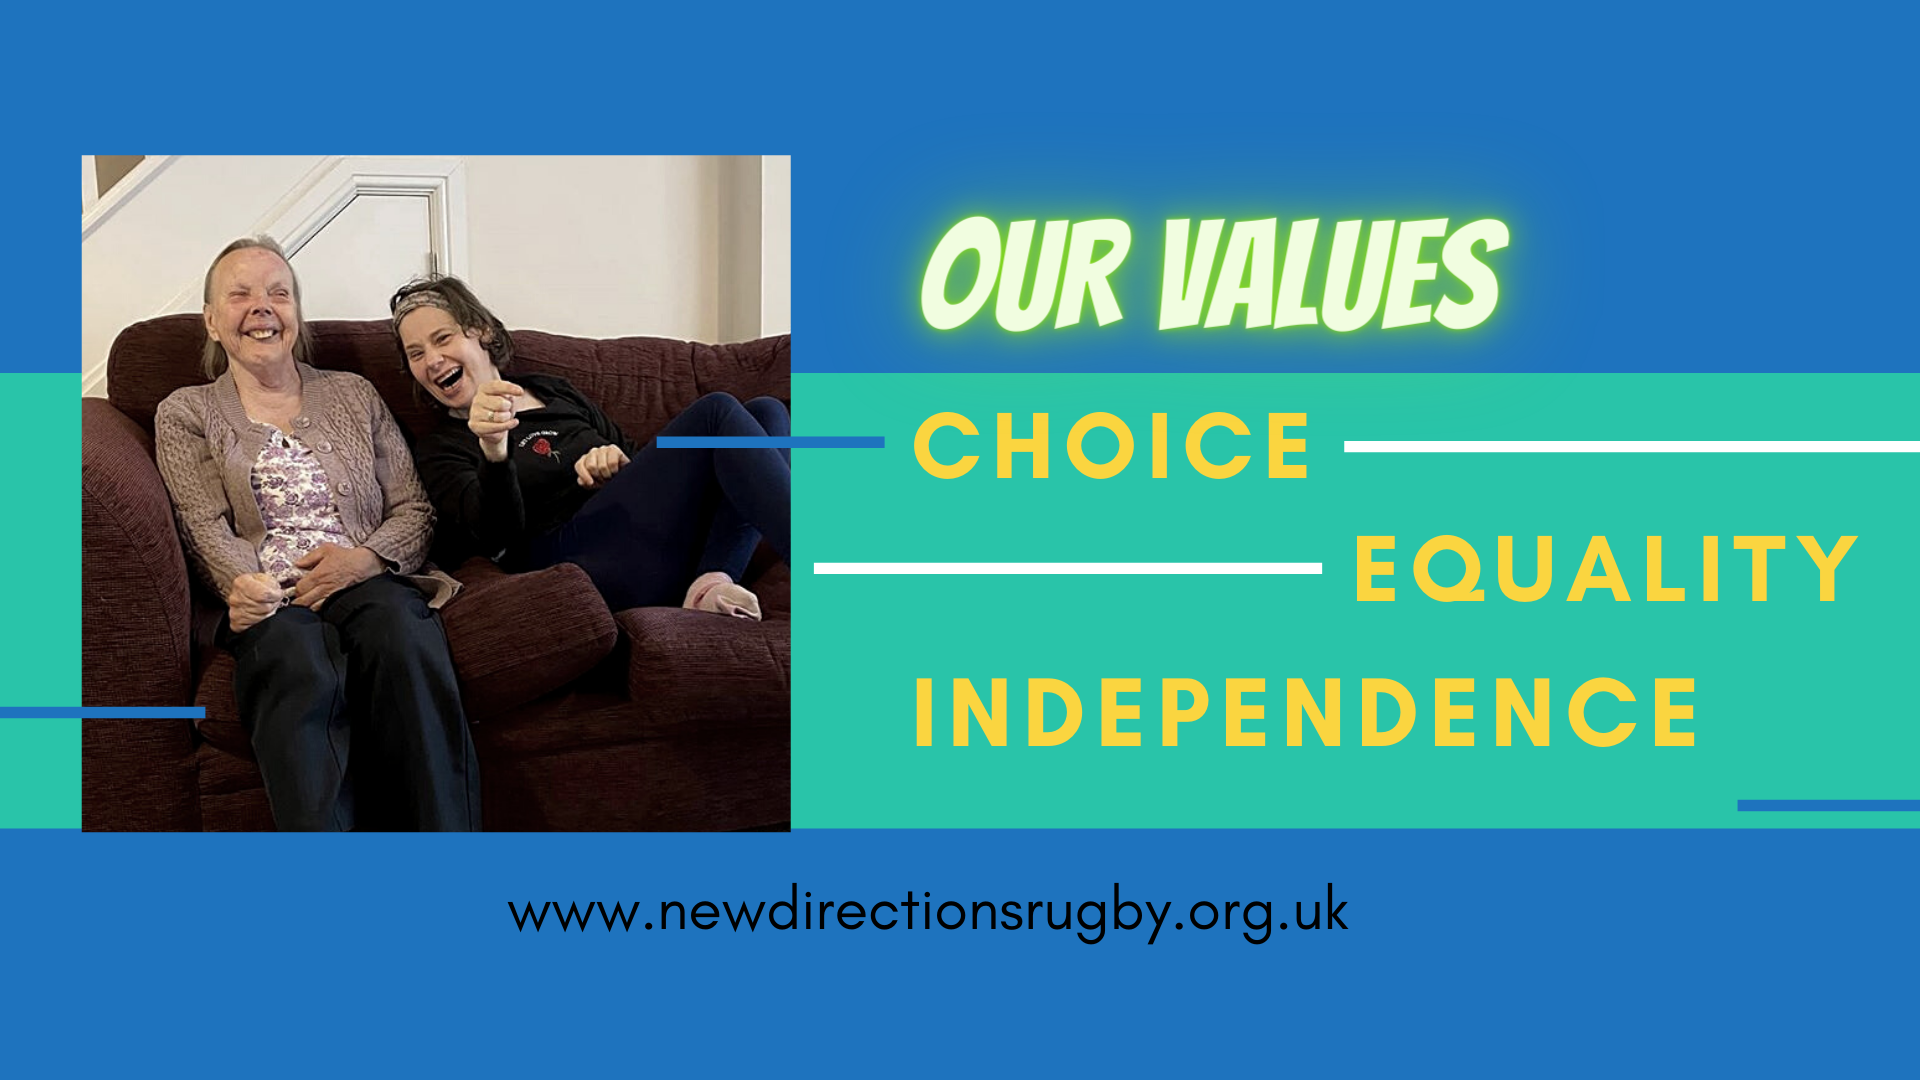 Choice, Equality, Independence